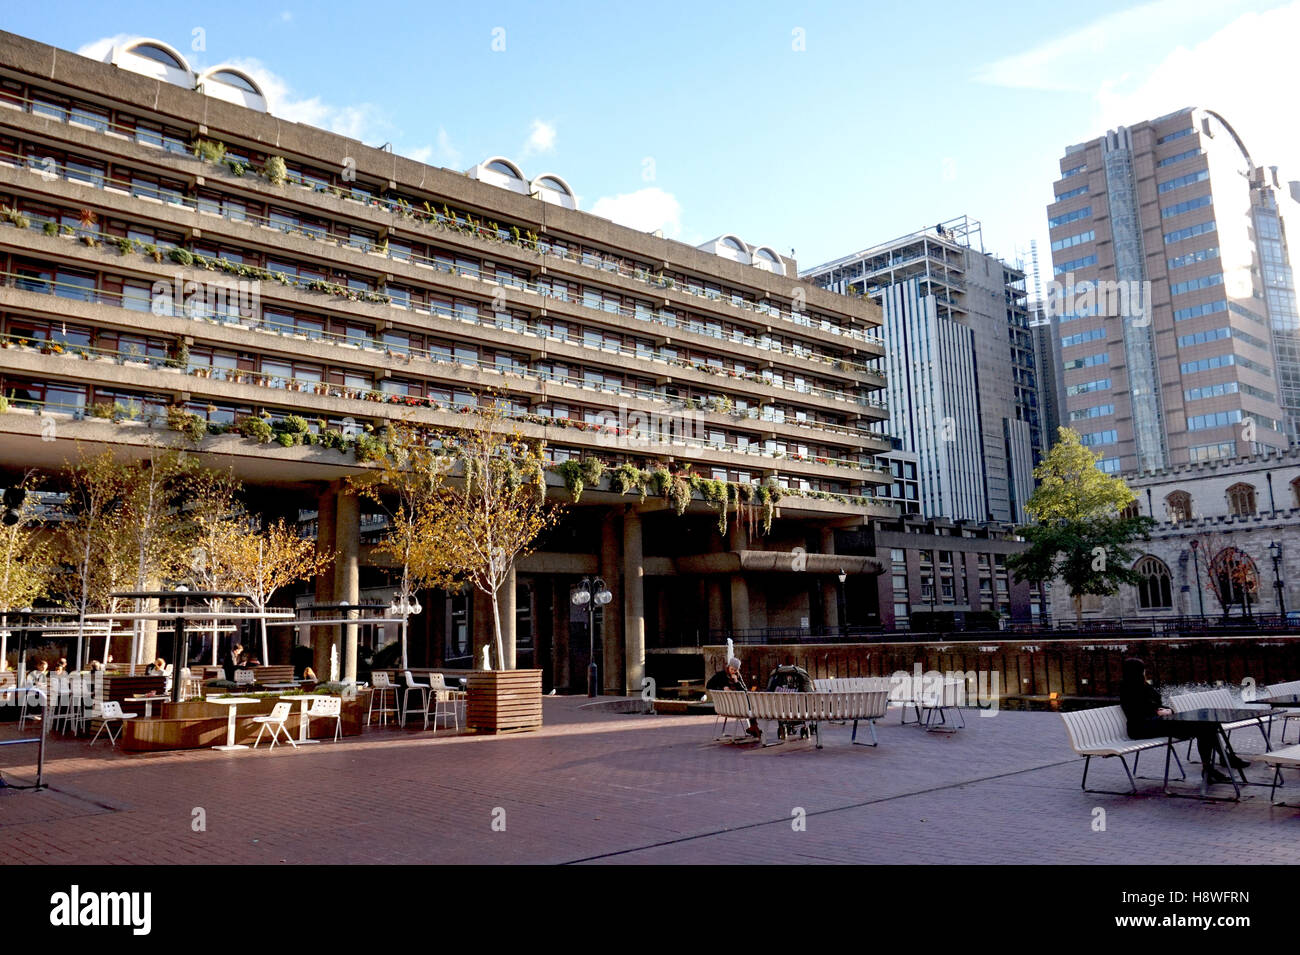 Residential buildings around the Barbican Centre, London, UK Stock Photo